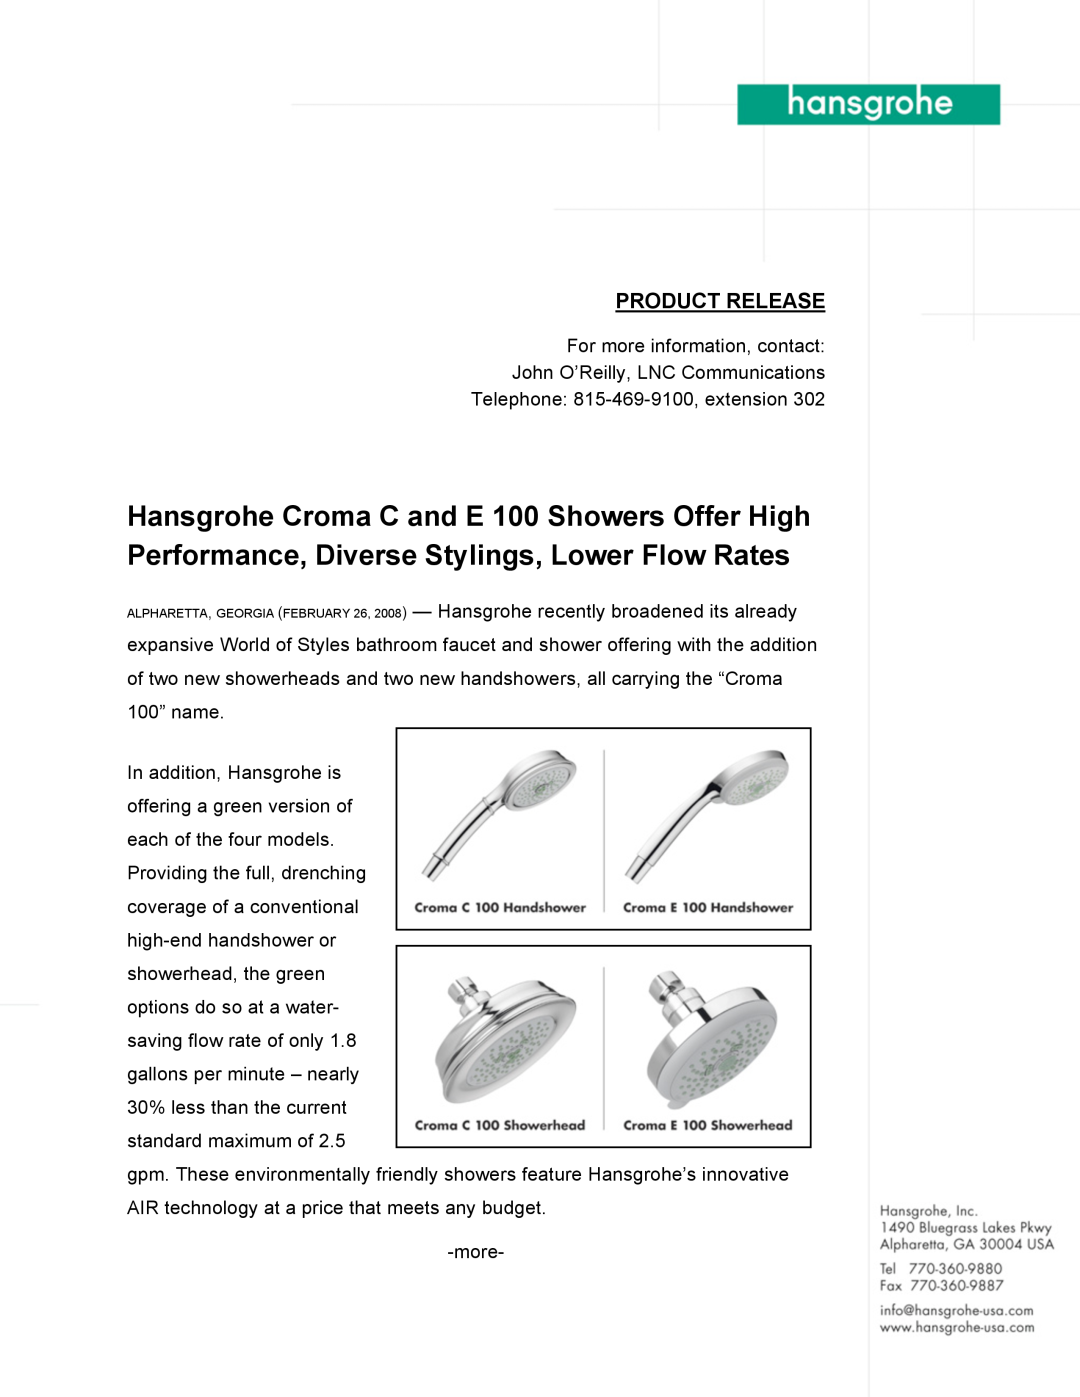 Hans Grohe 100 manual Product Release 